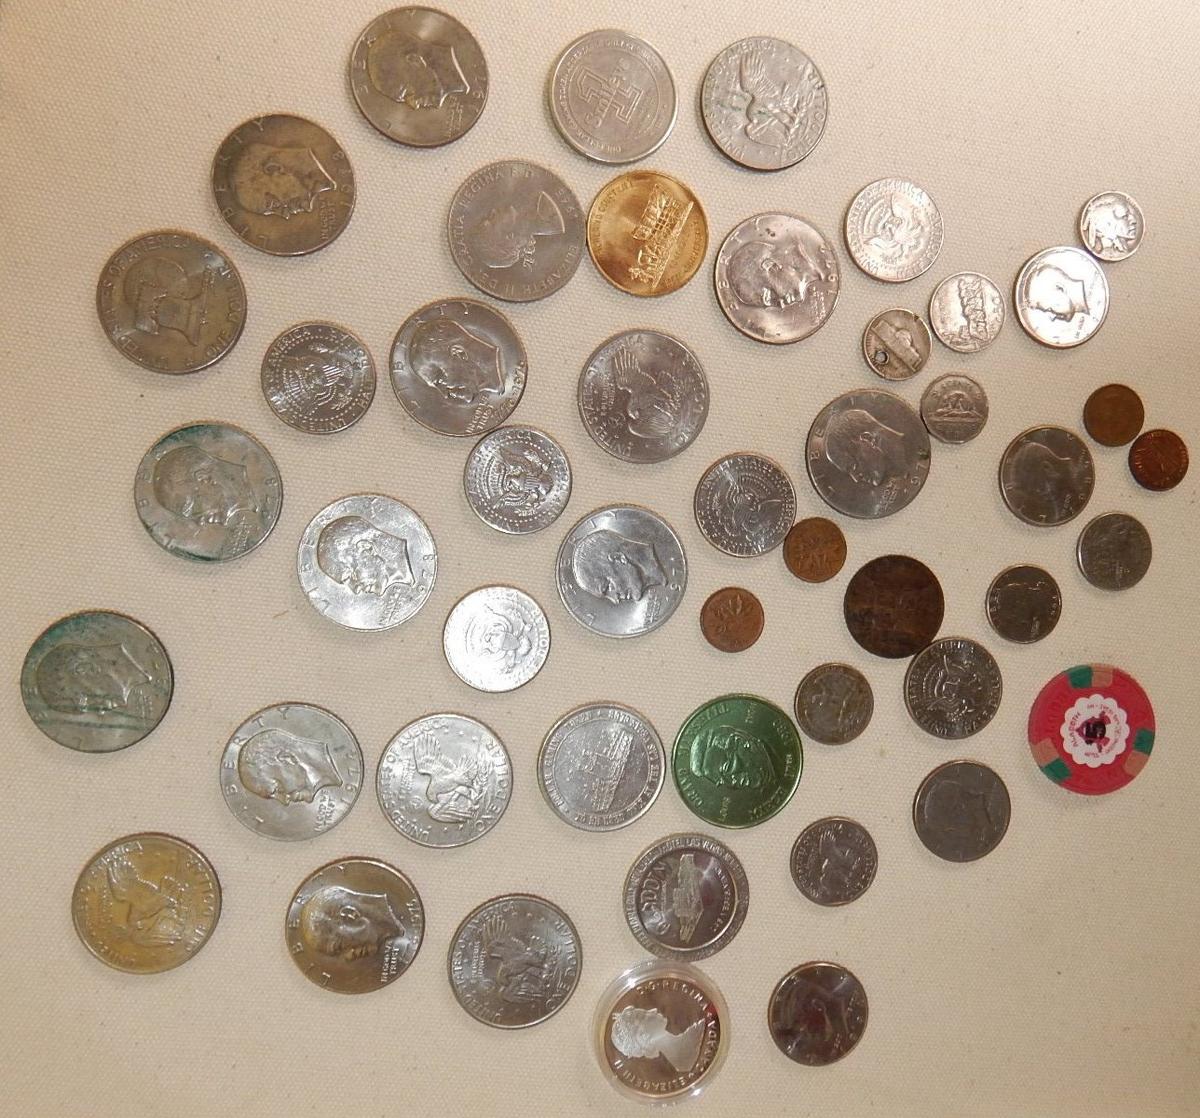 MIXED US COIN AND TOKEN COLLECTION